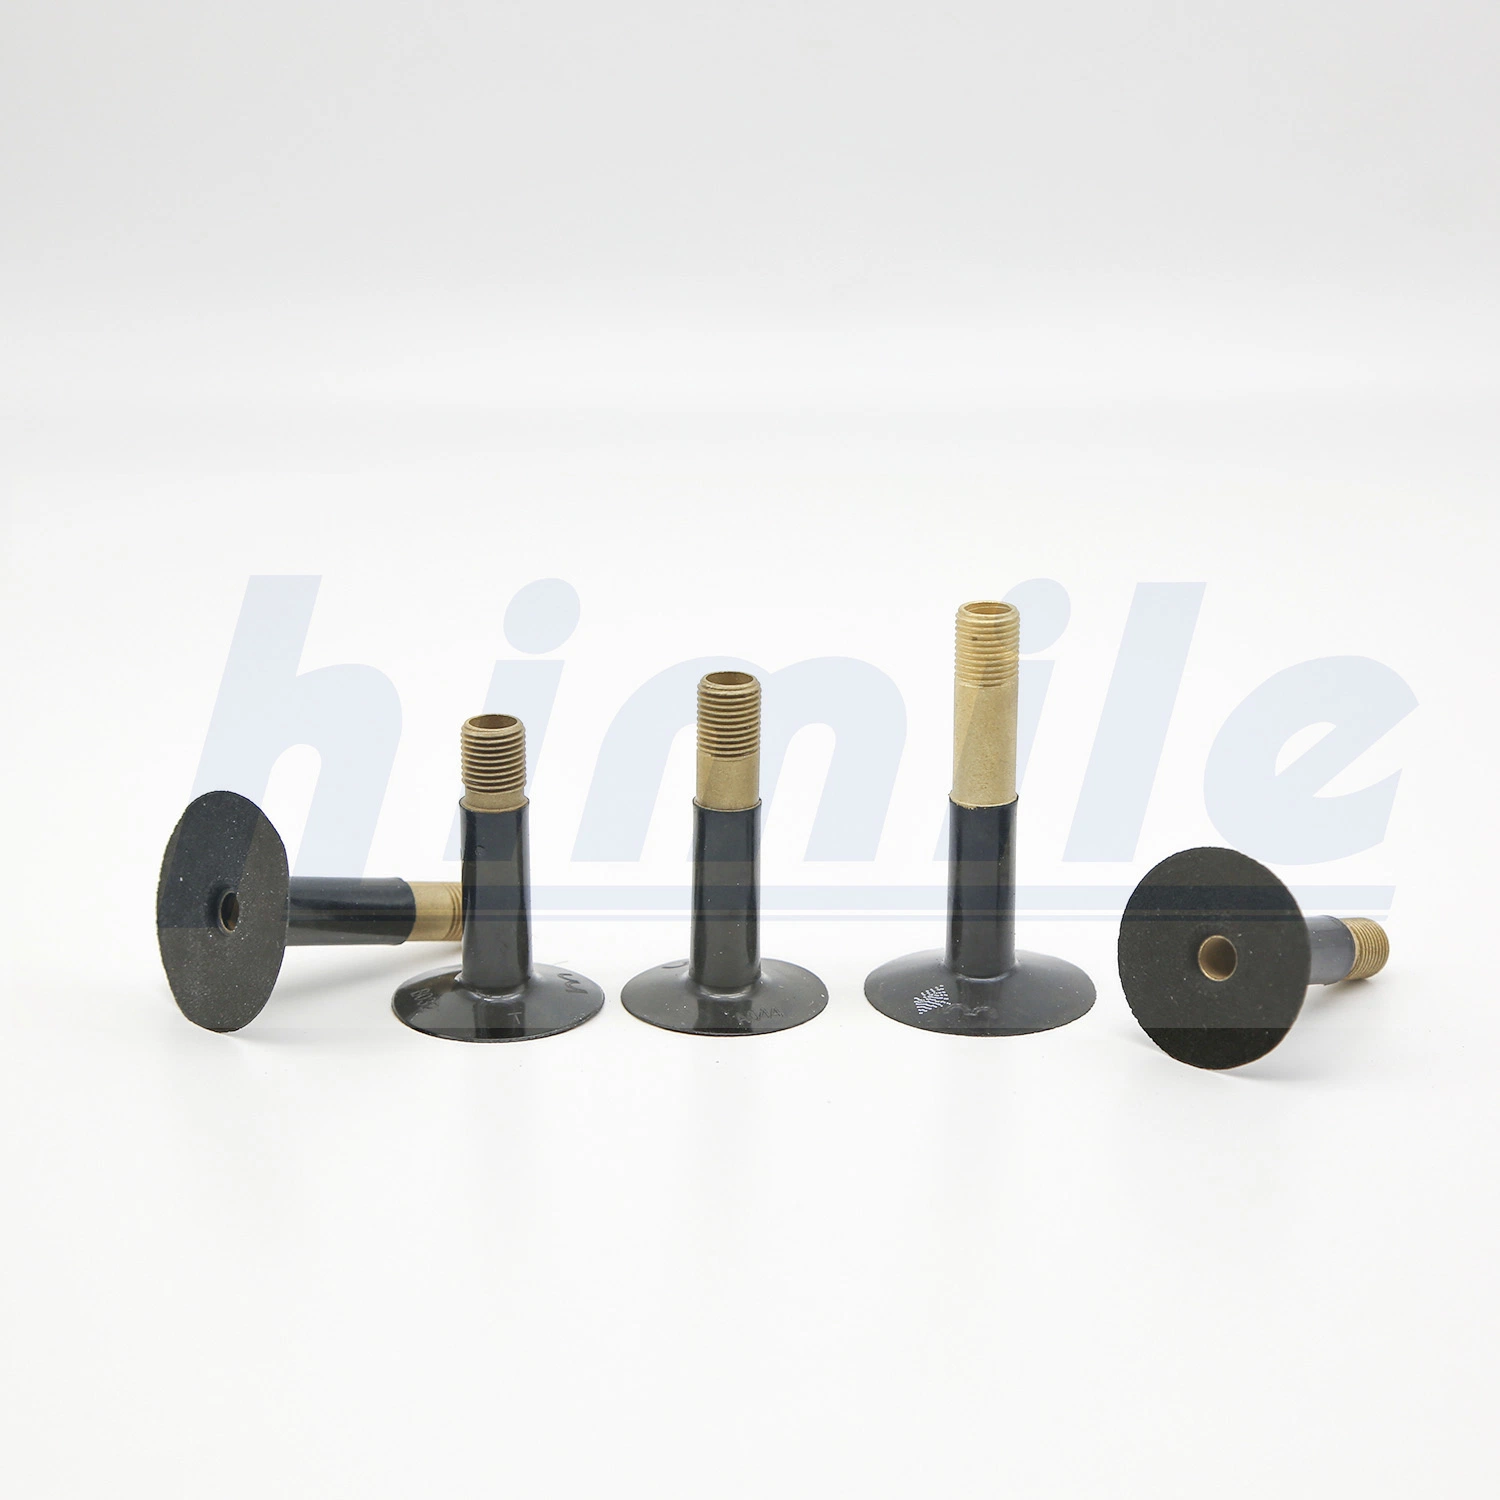 Himile Car Tyres Bicycle Tires Inner Tube Tyre Valves Motorcycle Parts Wheel Tube Valves Var32-35L Bicycle Tyre.